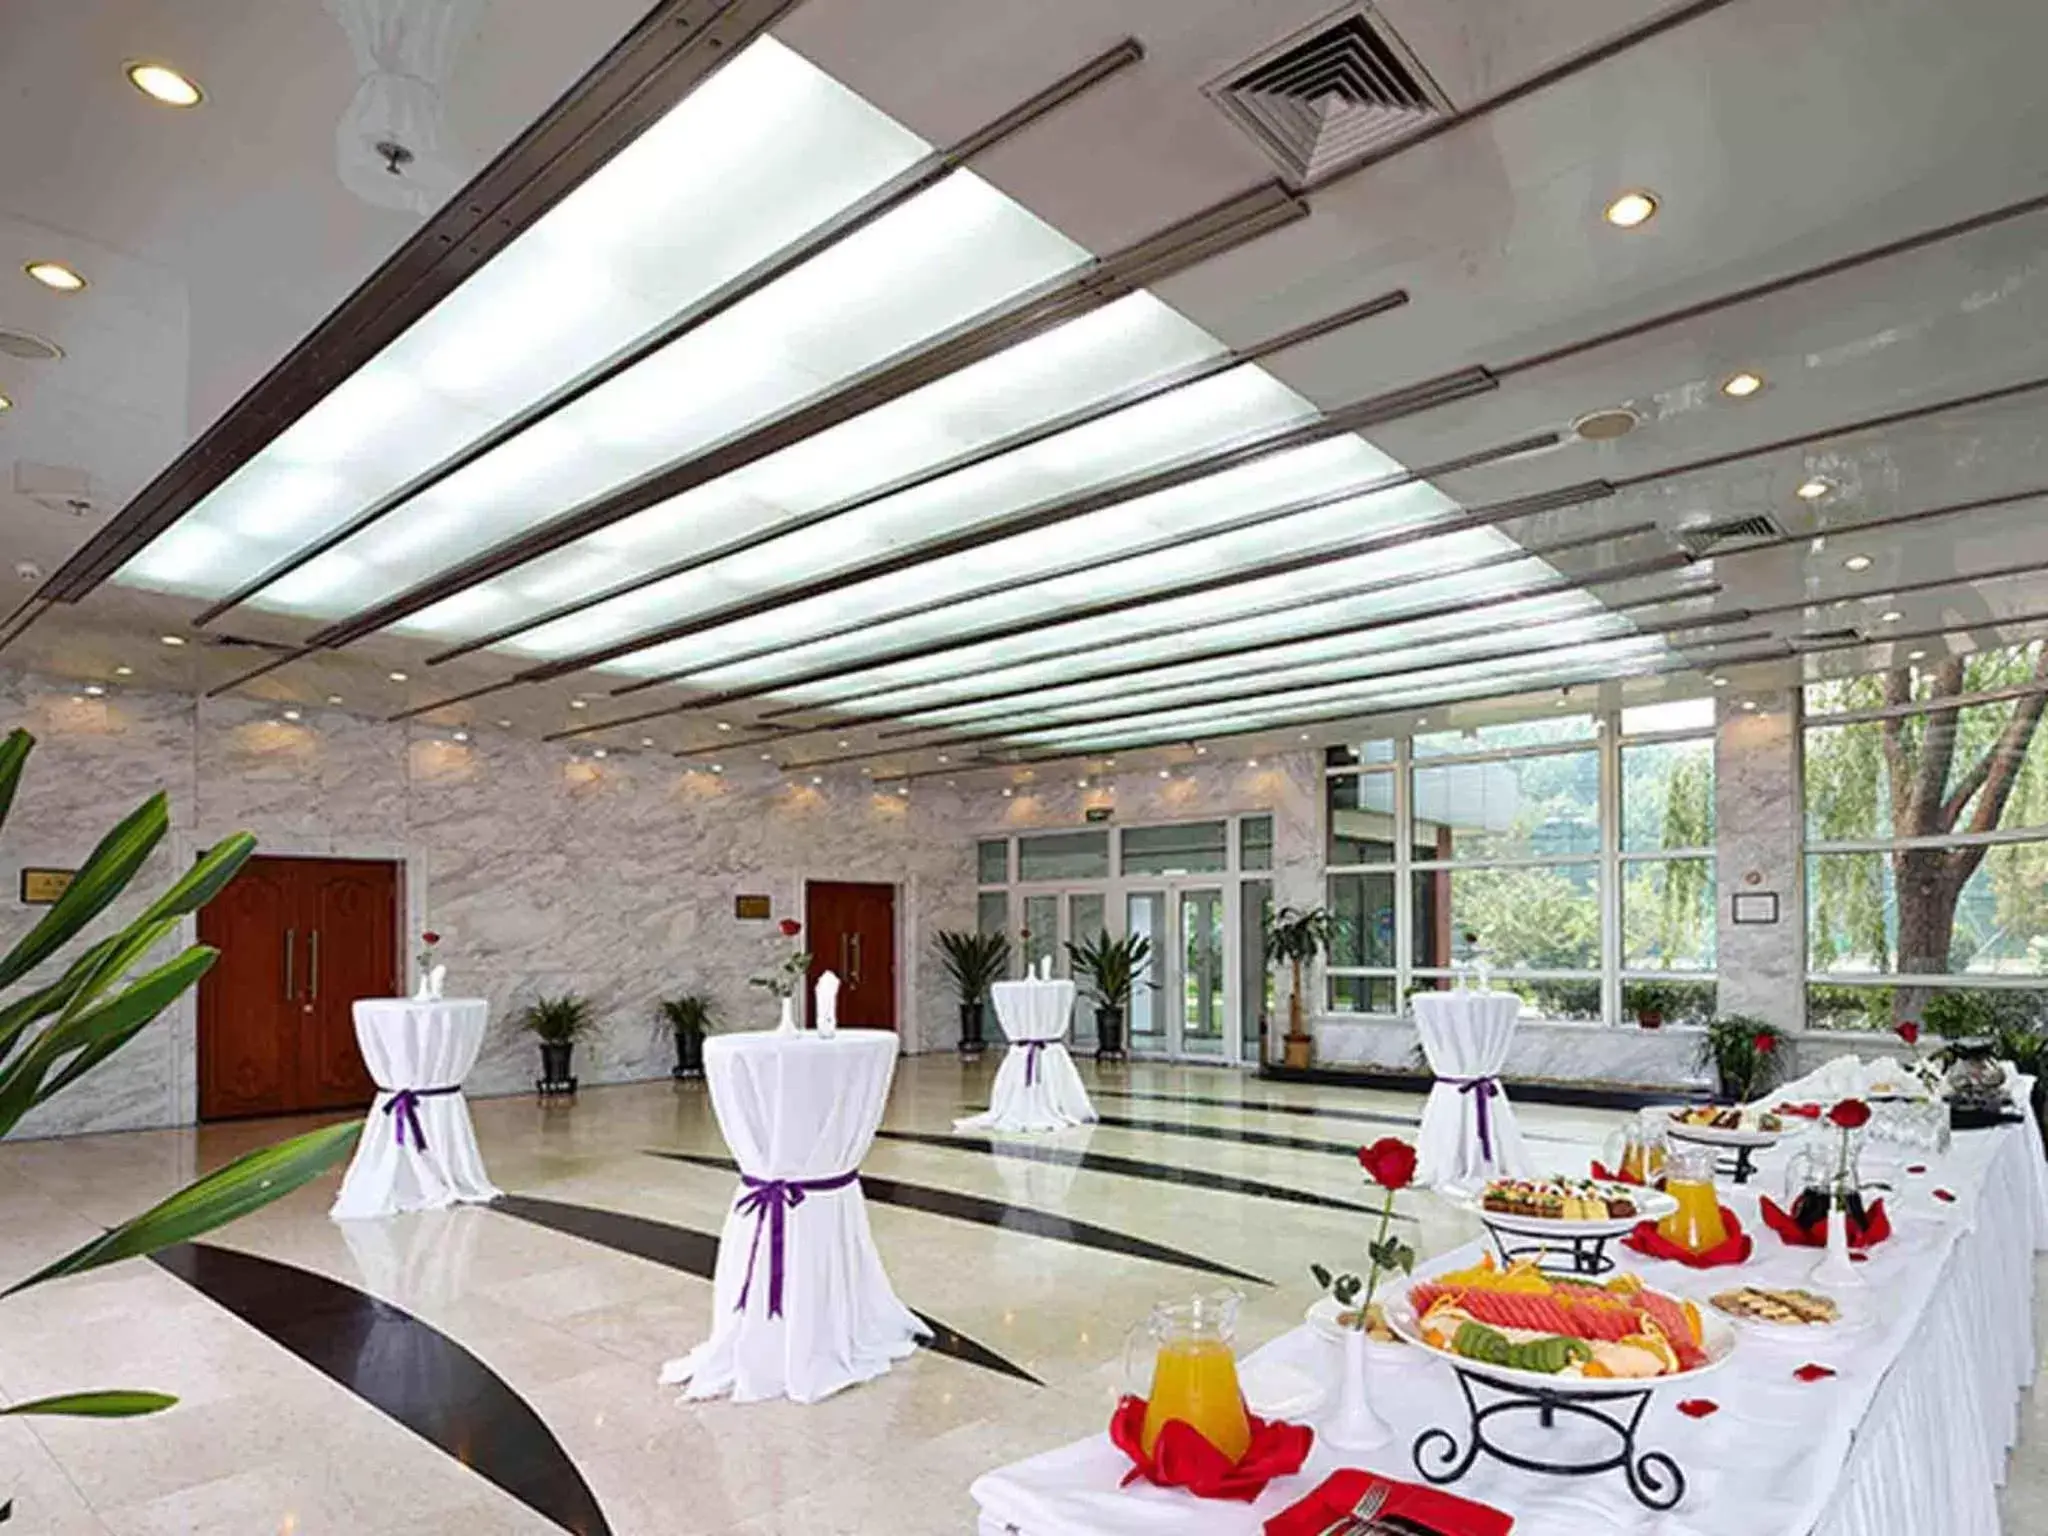 Banquet/Function facilities, Banquet Facilities in CITIC Hotel Beijing Airport